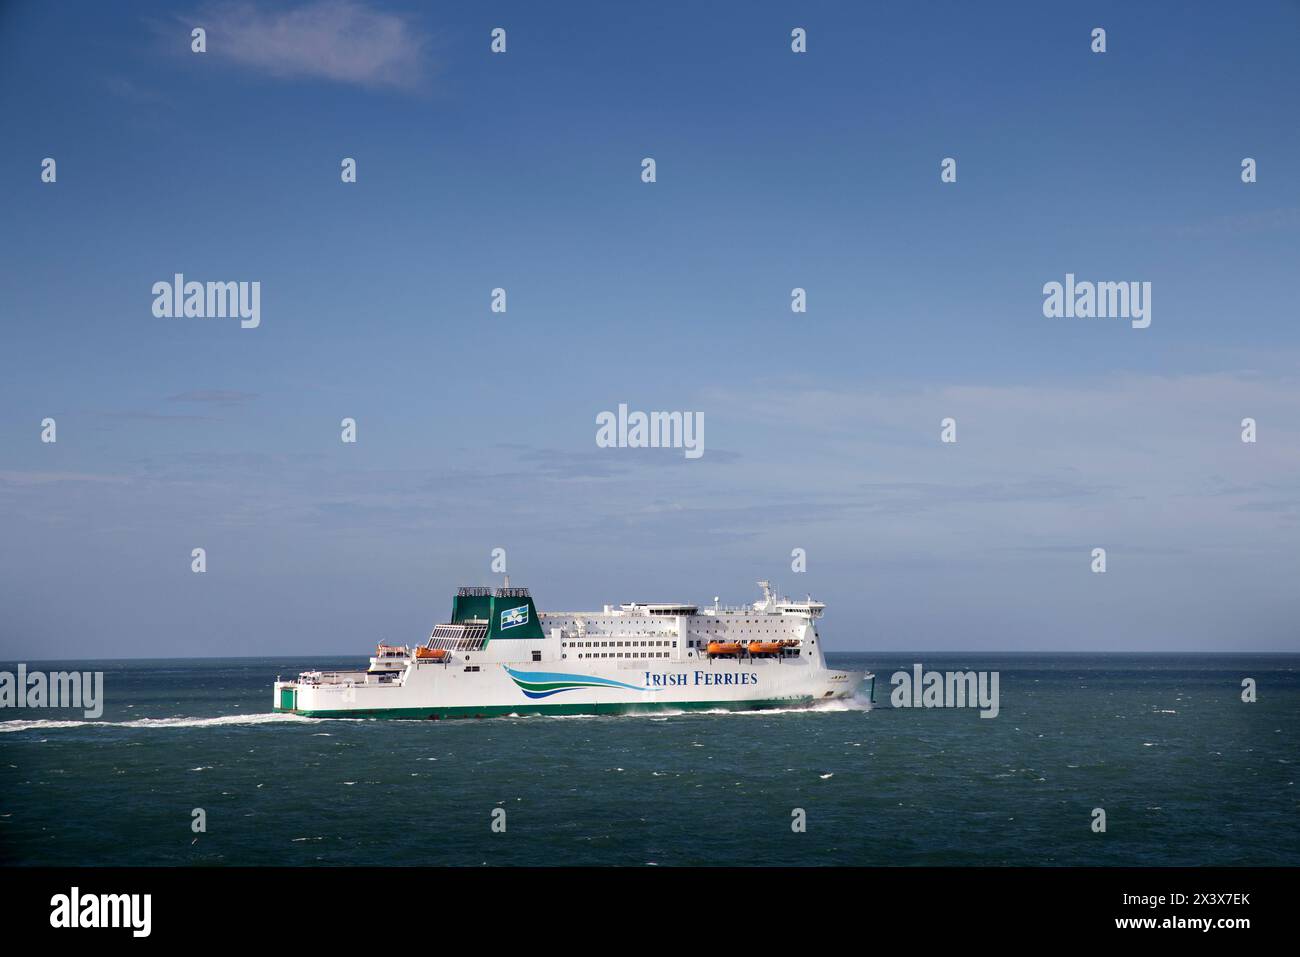 Irish Ferries en mer, Douvres, Angleterre, Royaume-Uni Banque D'Images